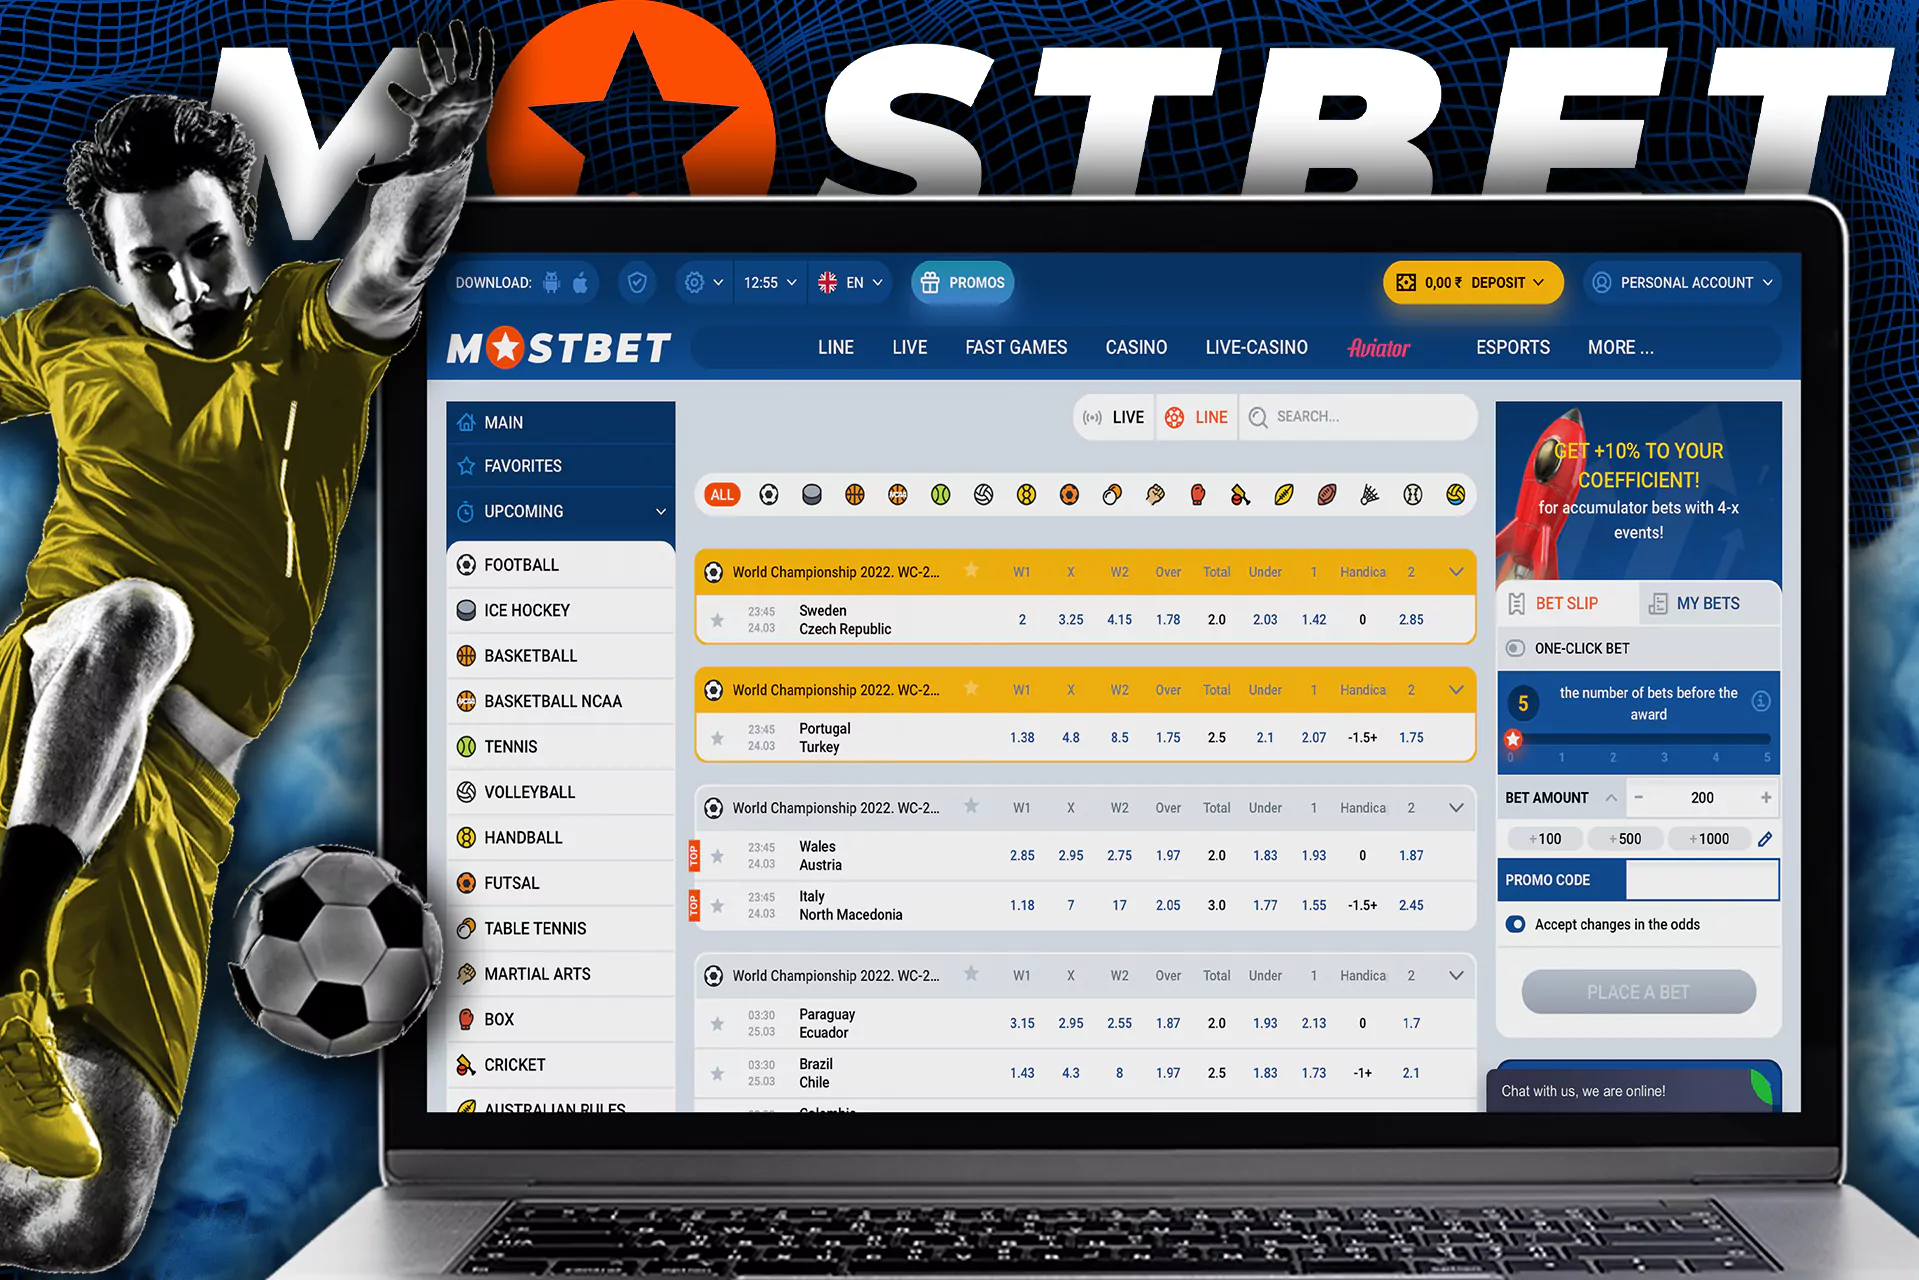 There is a wide line of sports markets and odds at Mostbet.